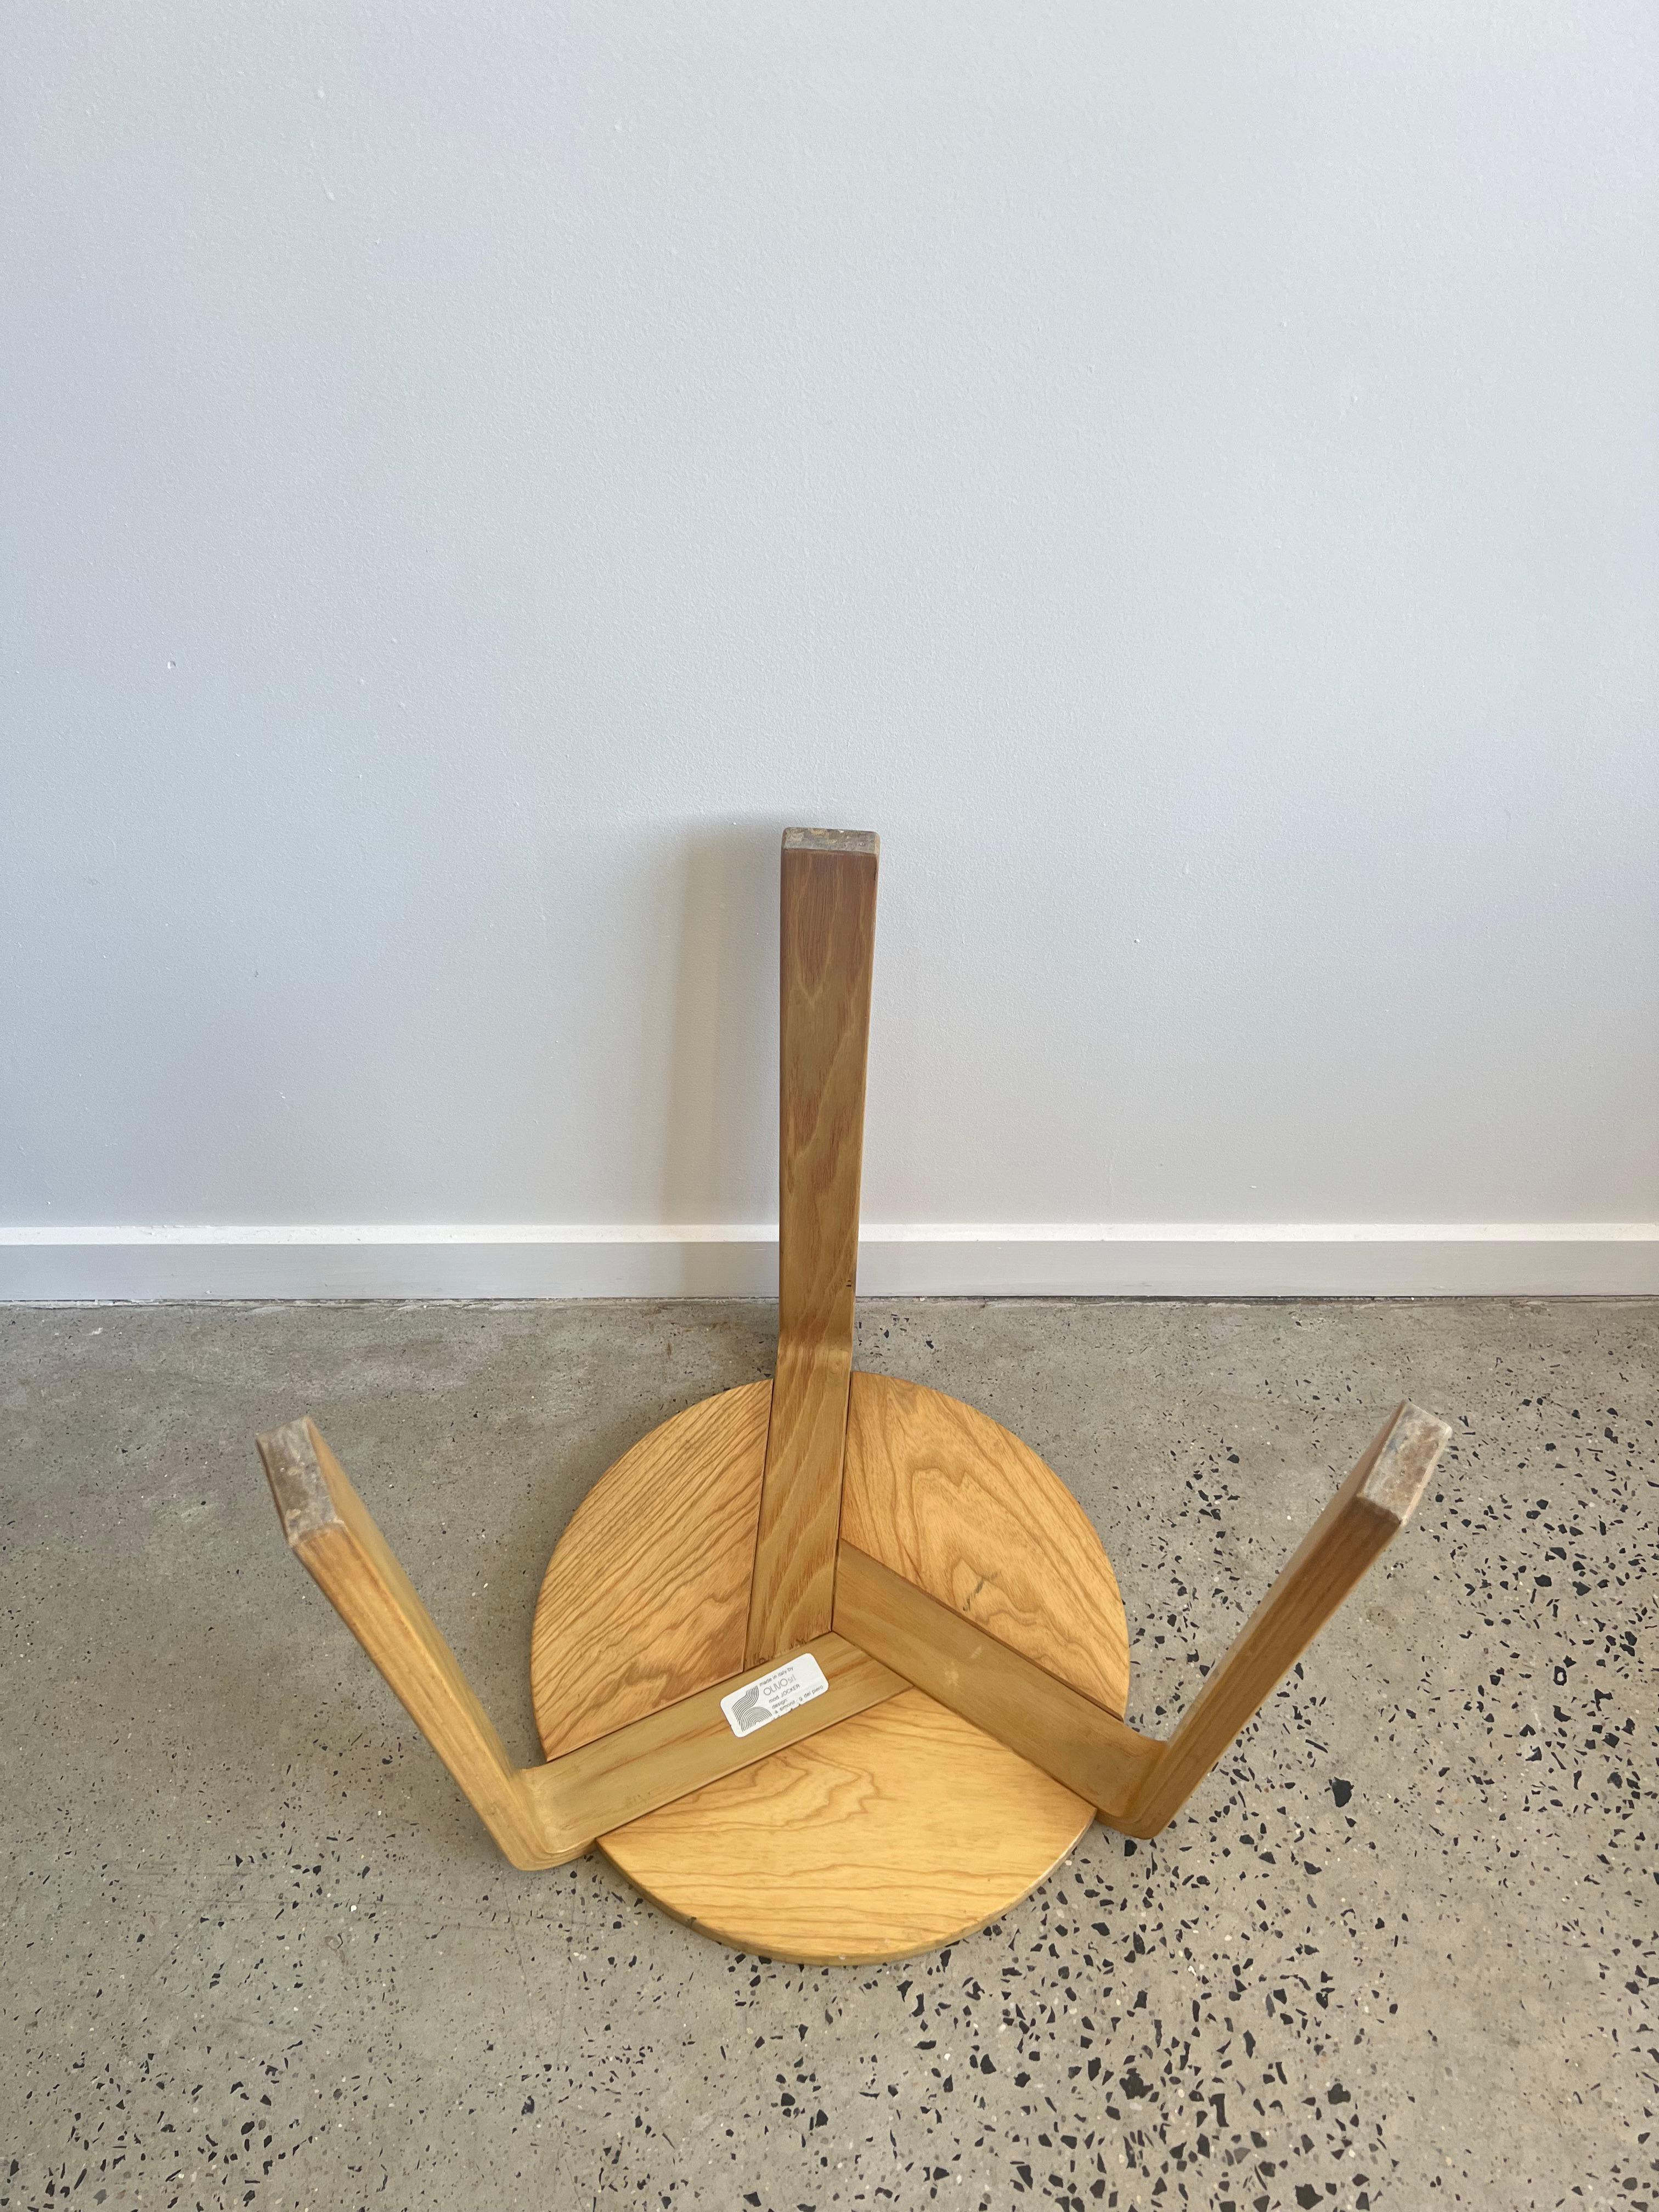 Late 20th Century Mid-Century Modern Italian Wood Stool by A.Simoni & G. Del Piero for Olive S.R.L For Sale